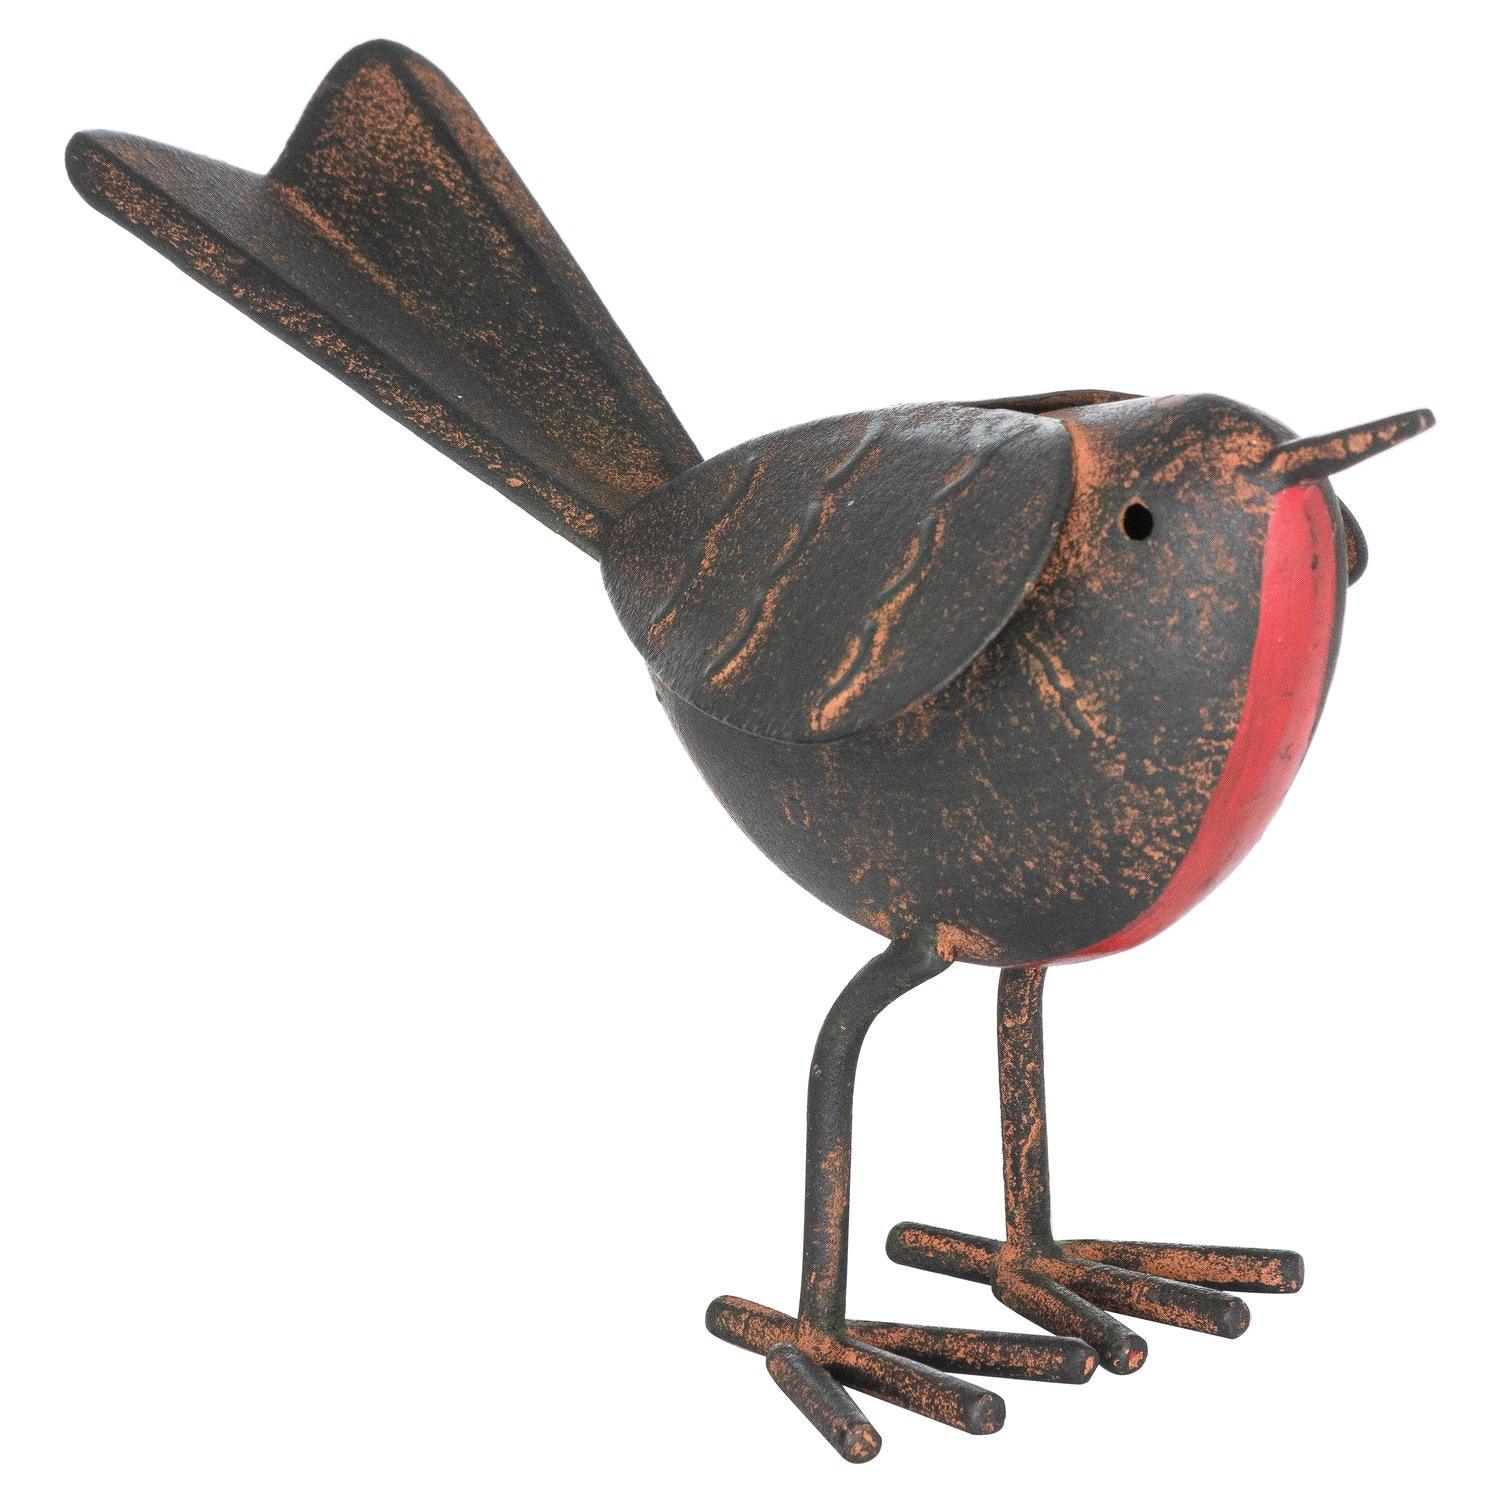 View Rocky The Robin Ornament information